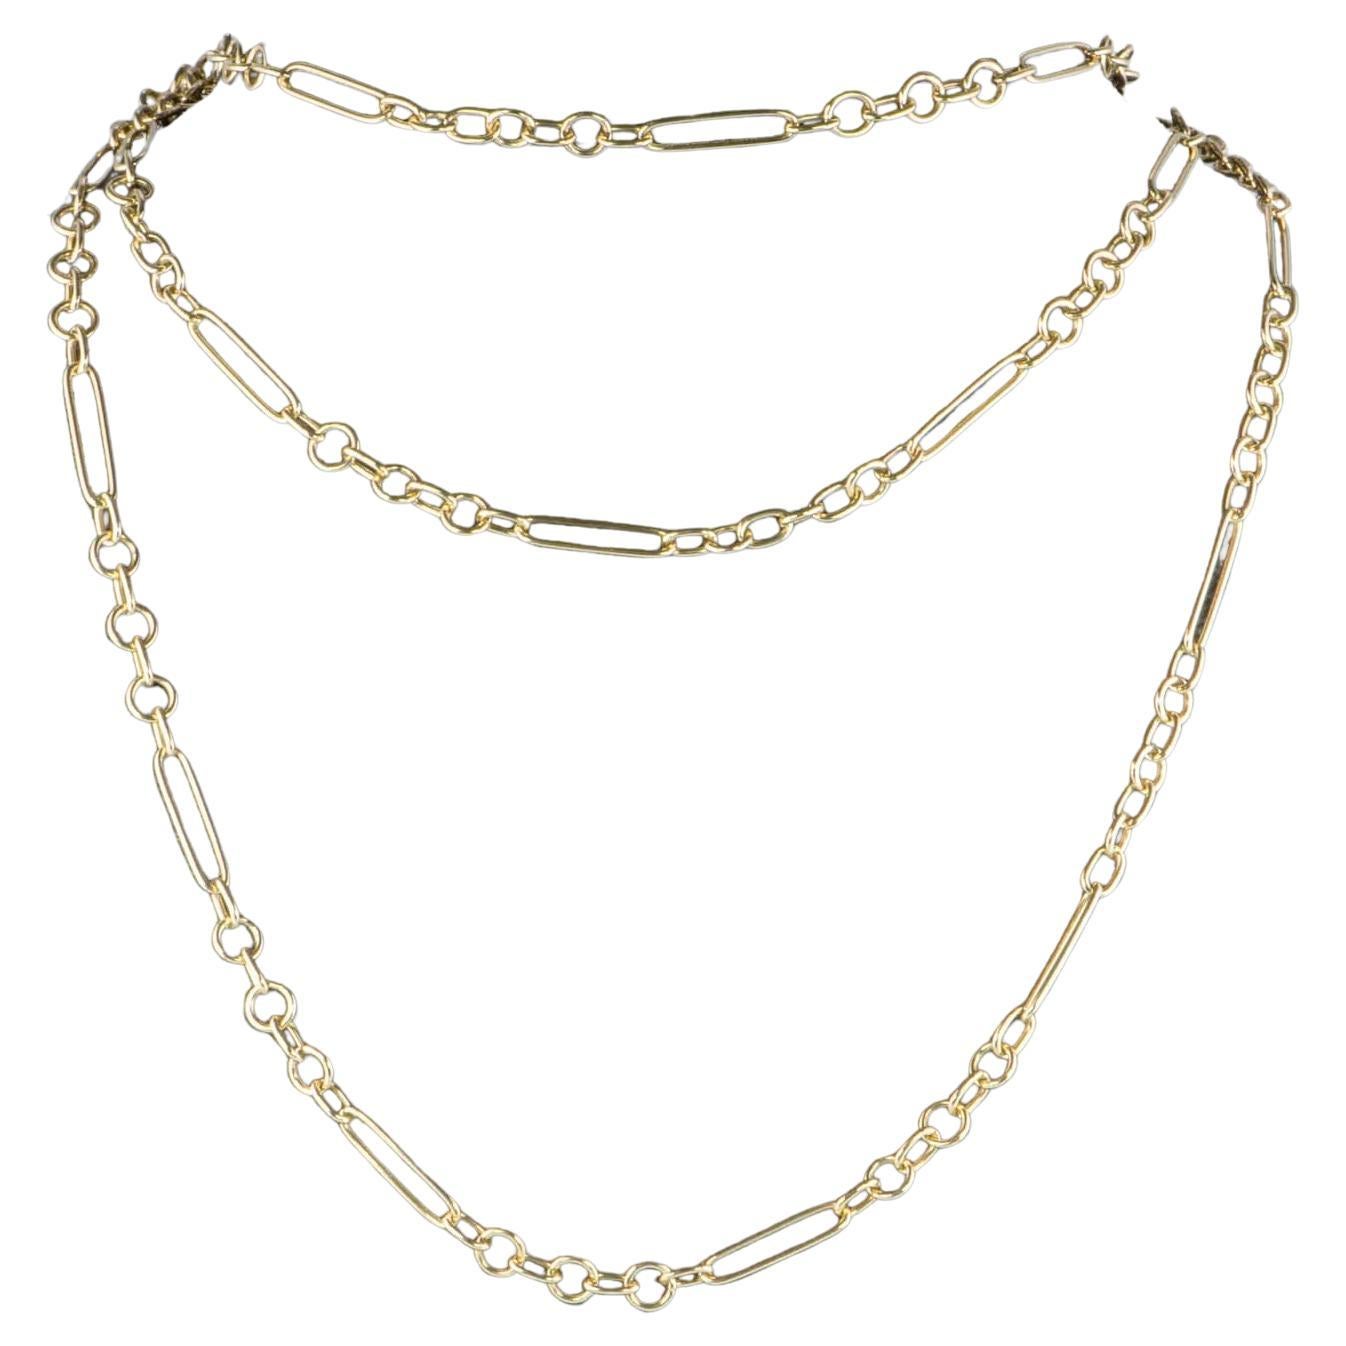 Double Accent 9mm Stainless Steel Chain Necklace Curb Chain Necklace  (Available Length 20,24,30)